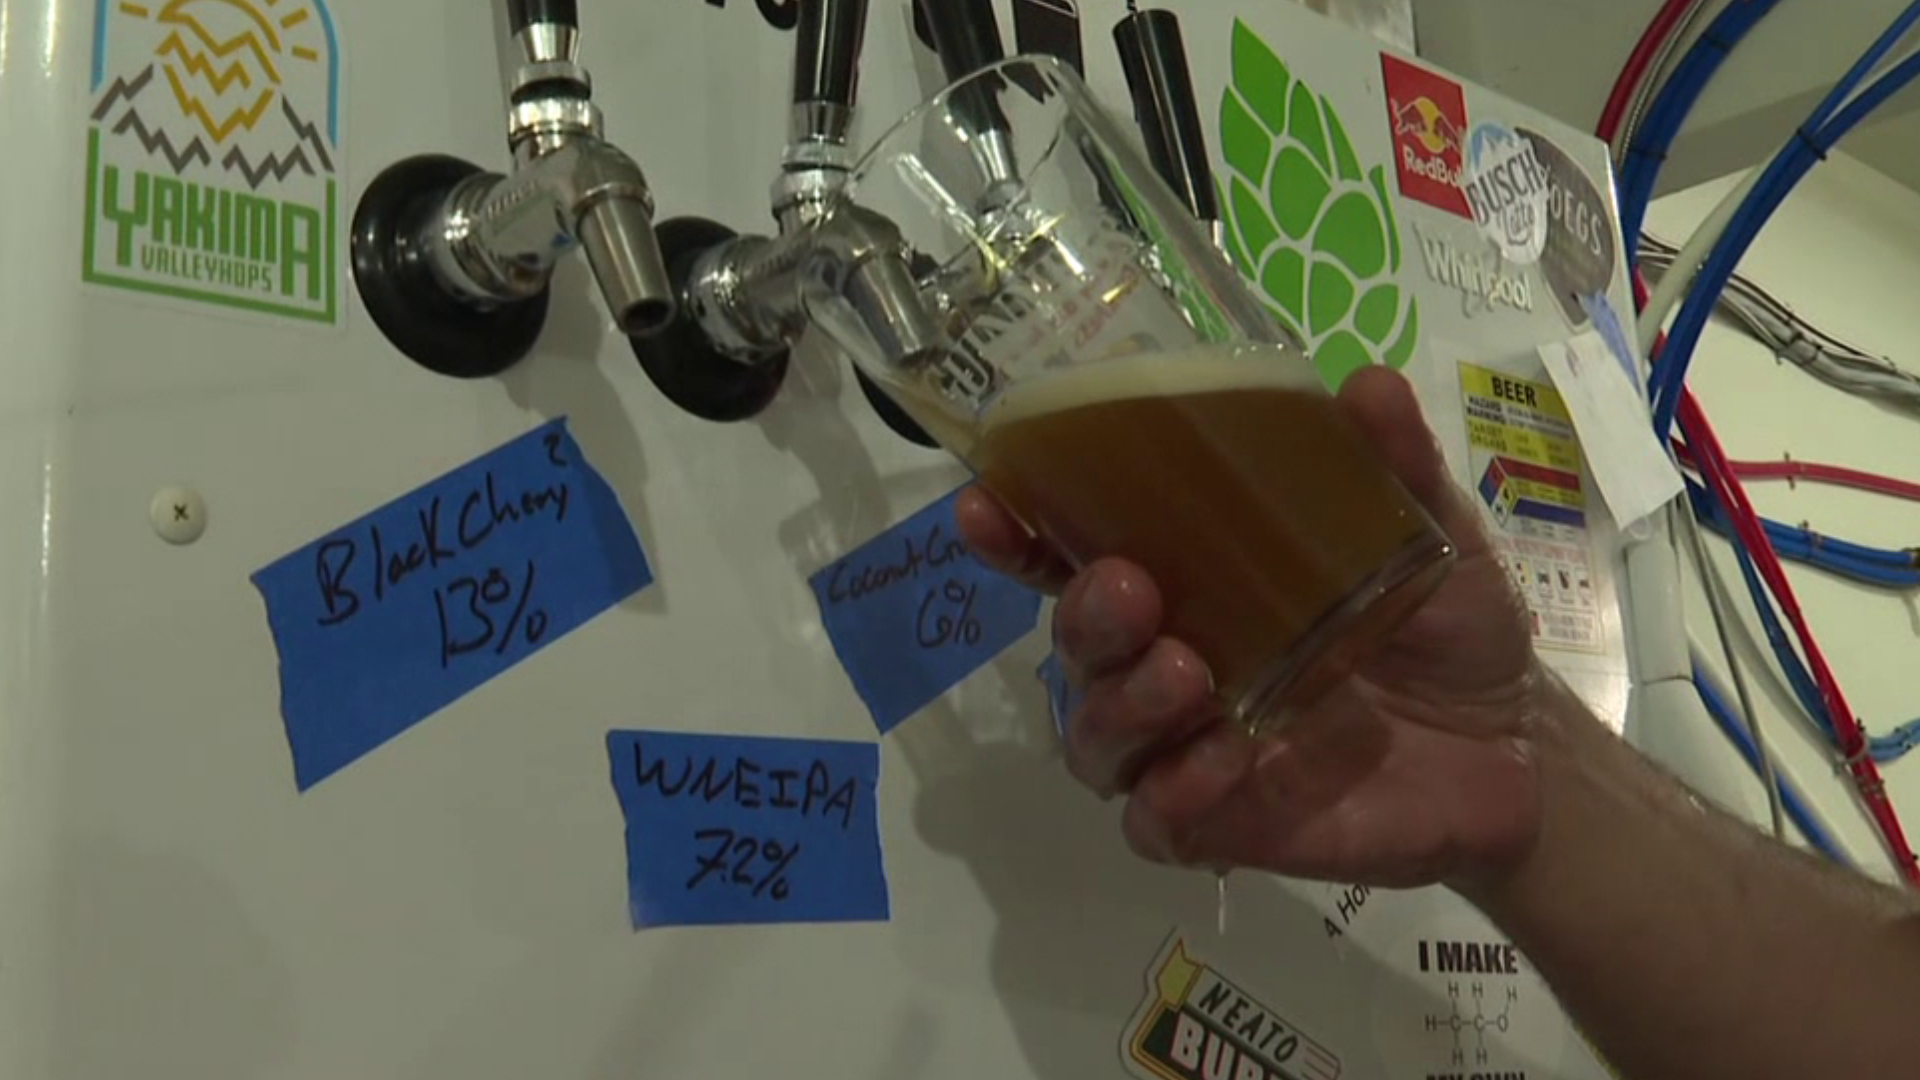 Beer enthusiast uses the pandemic to master the art of homebrewing.